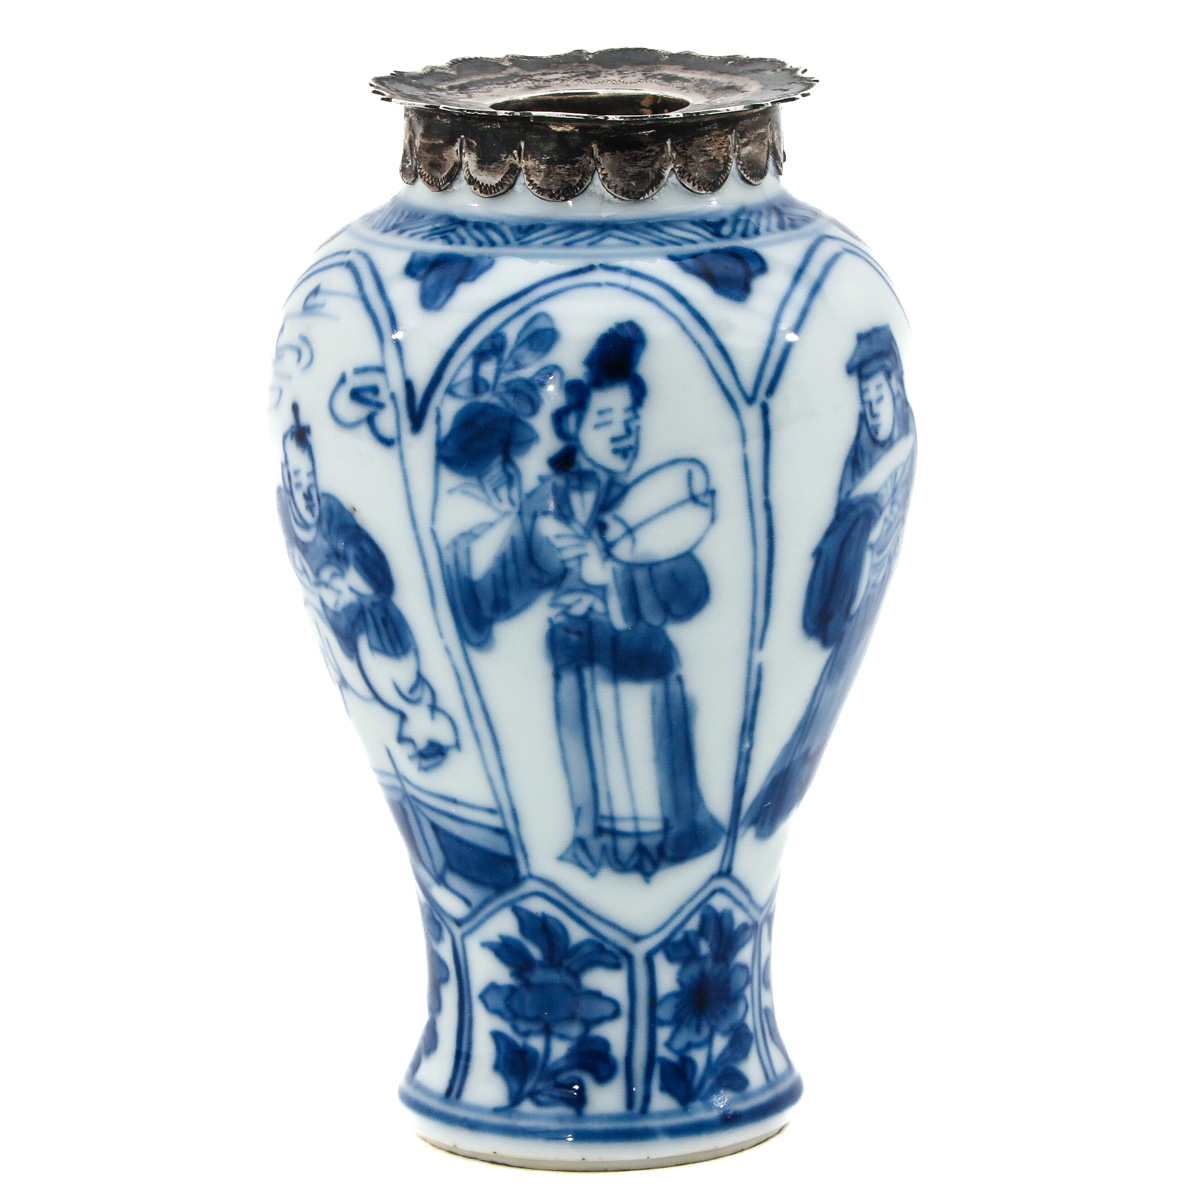 A Blue and White Miniature Vase